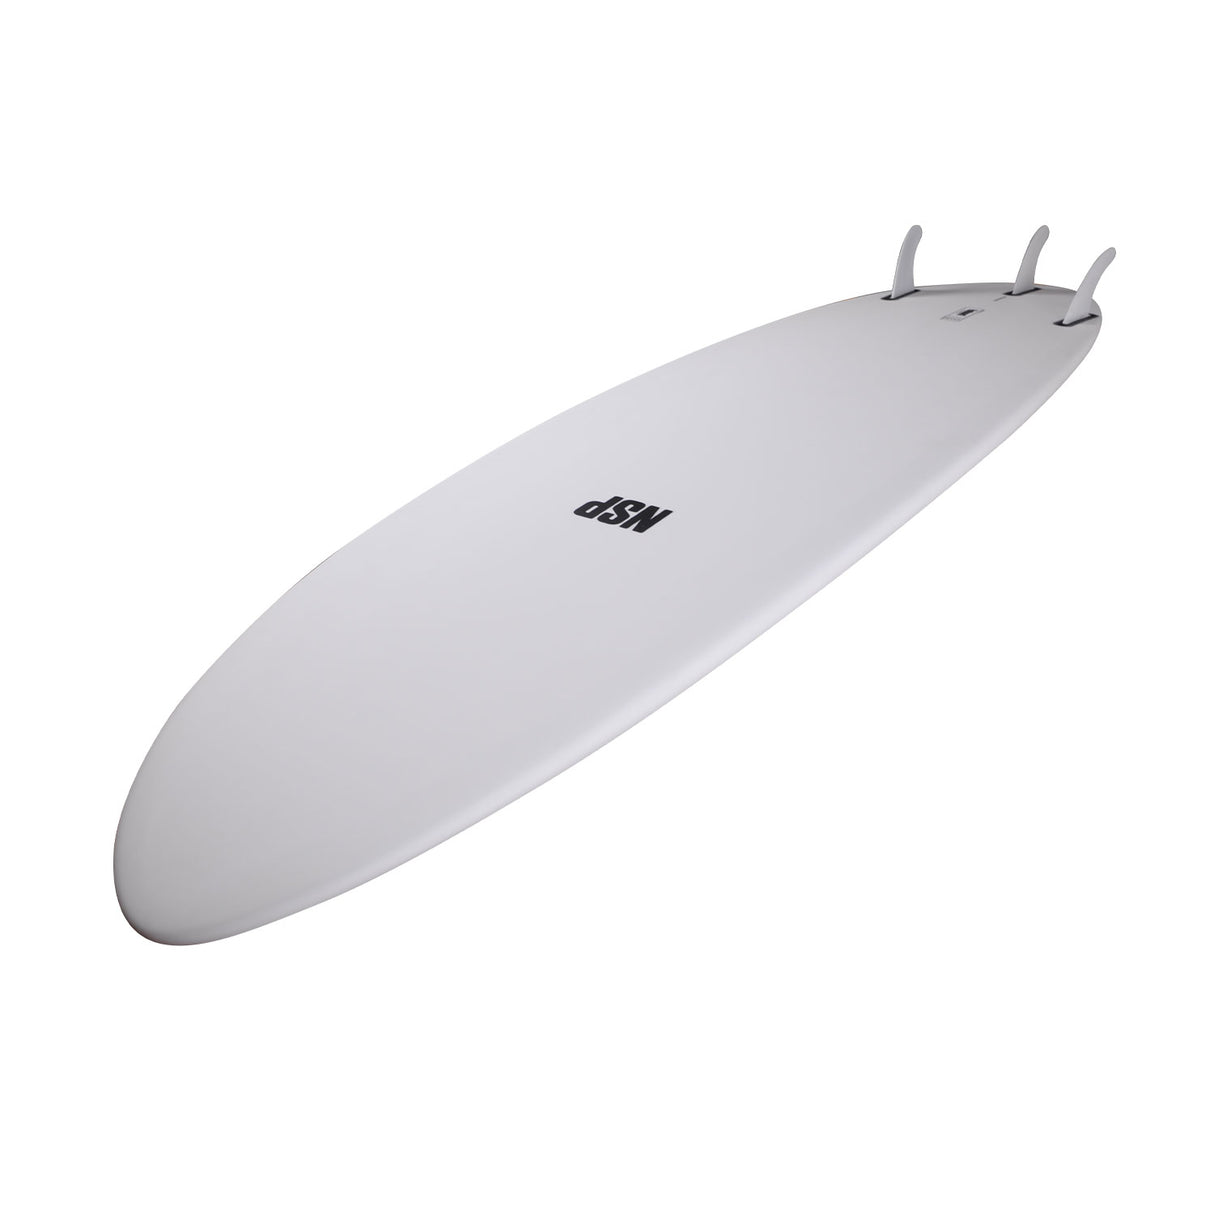 NSP Protech Funboard Surfboard (comes with fins)